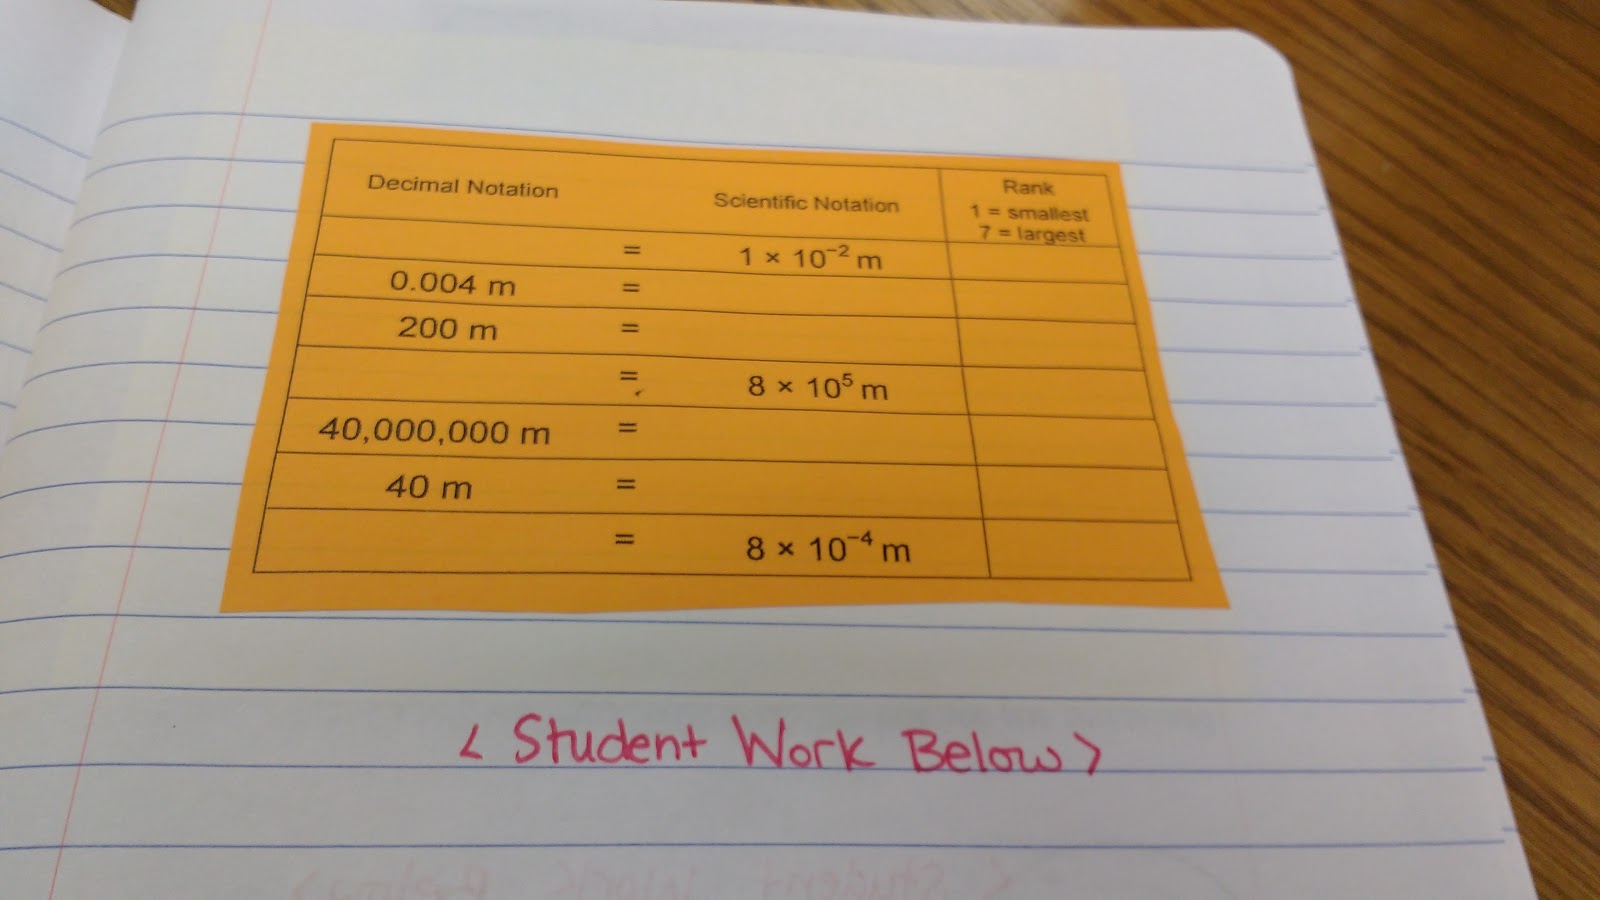 scientific notation ranking task in interactive notebook. 